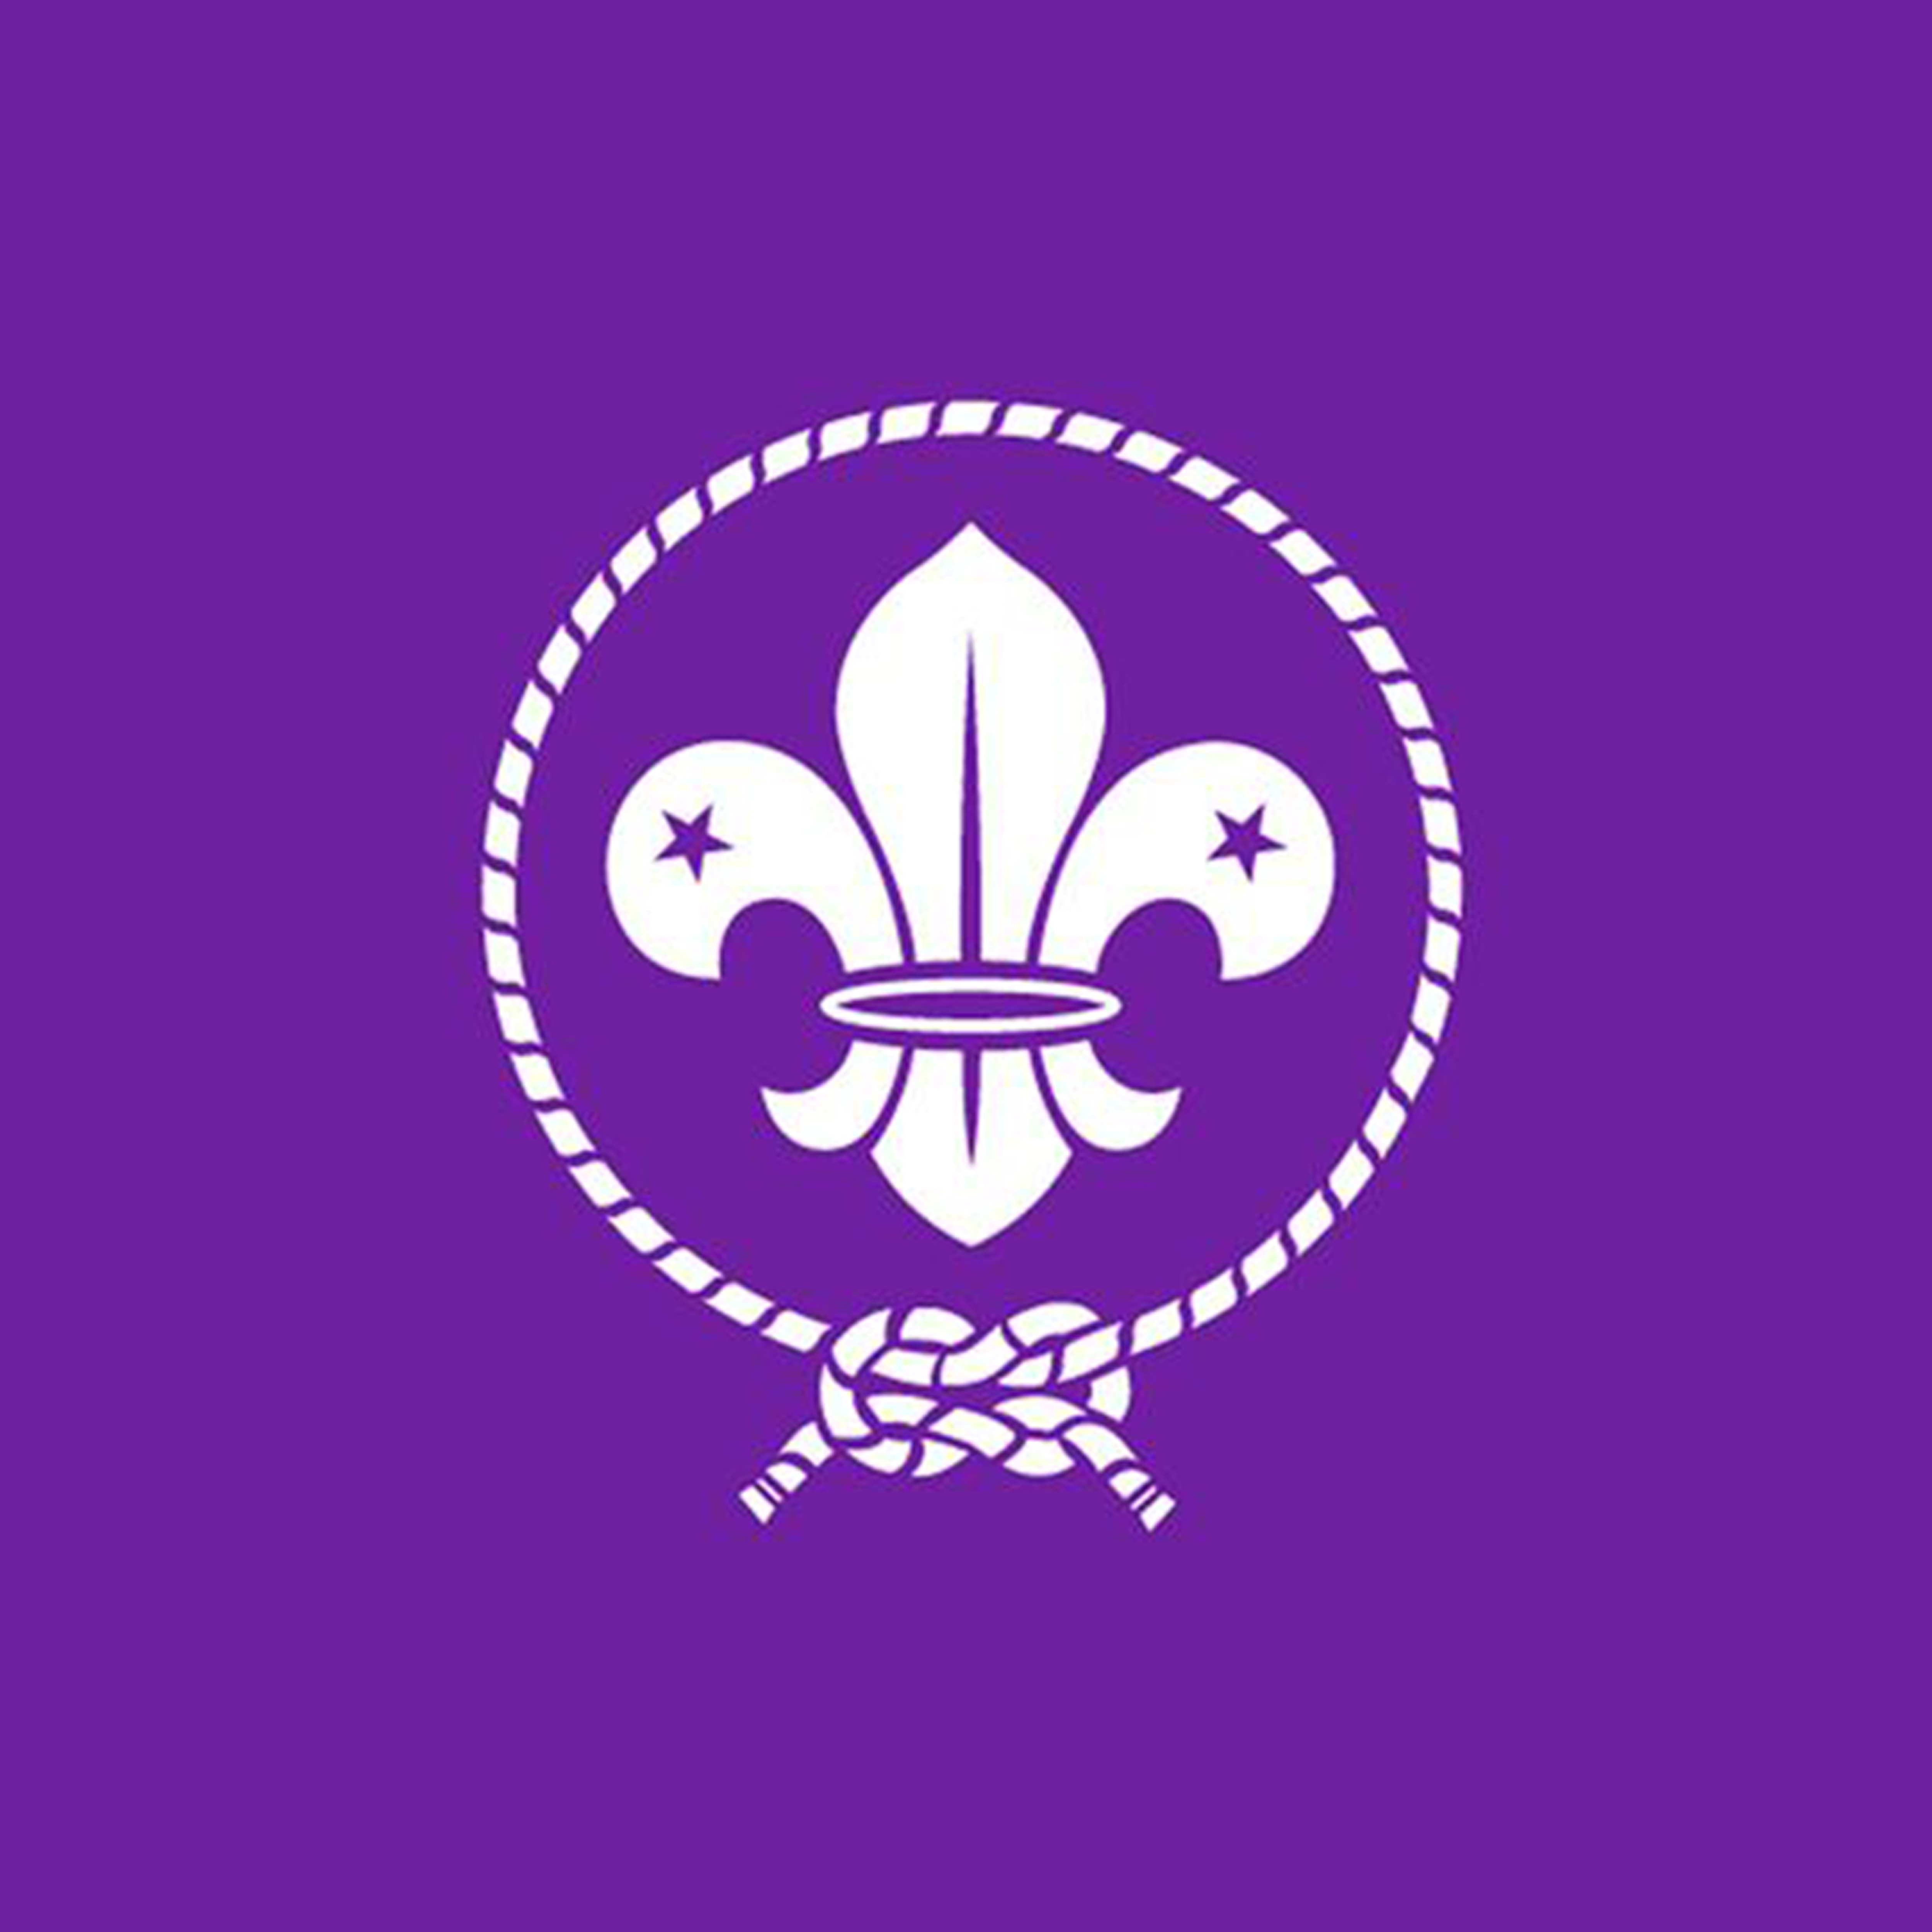 The Scout Movement